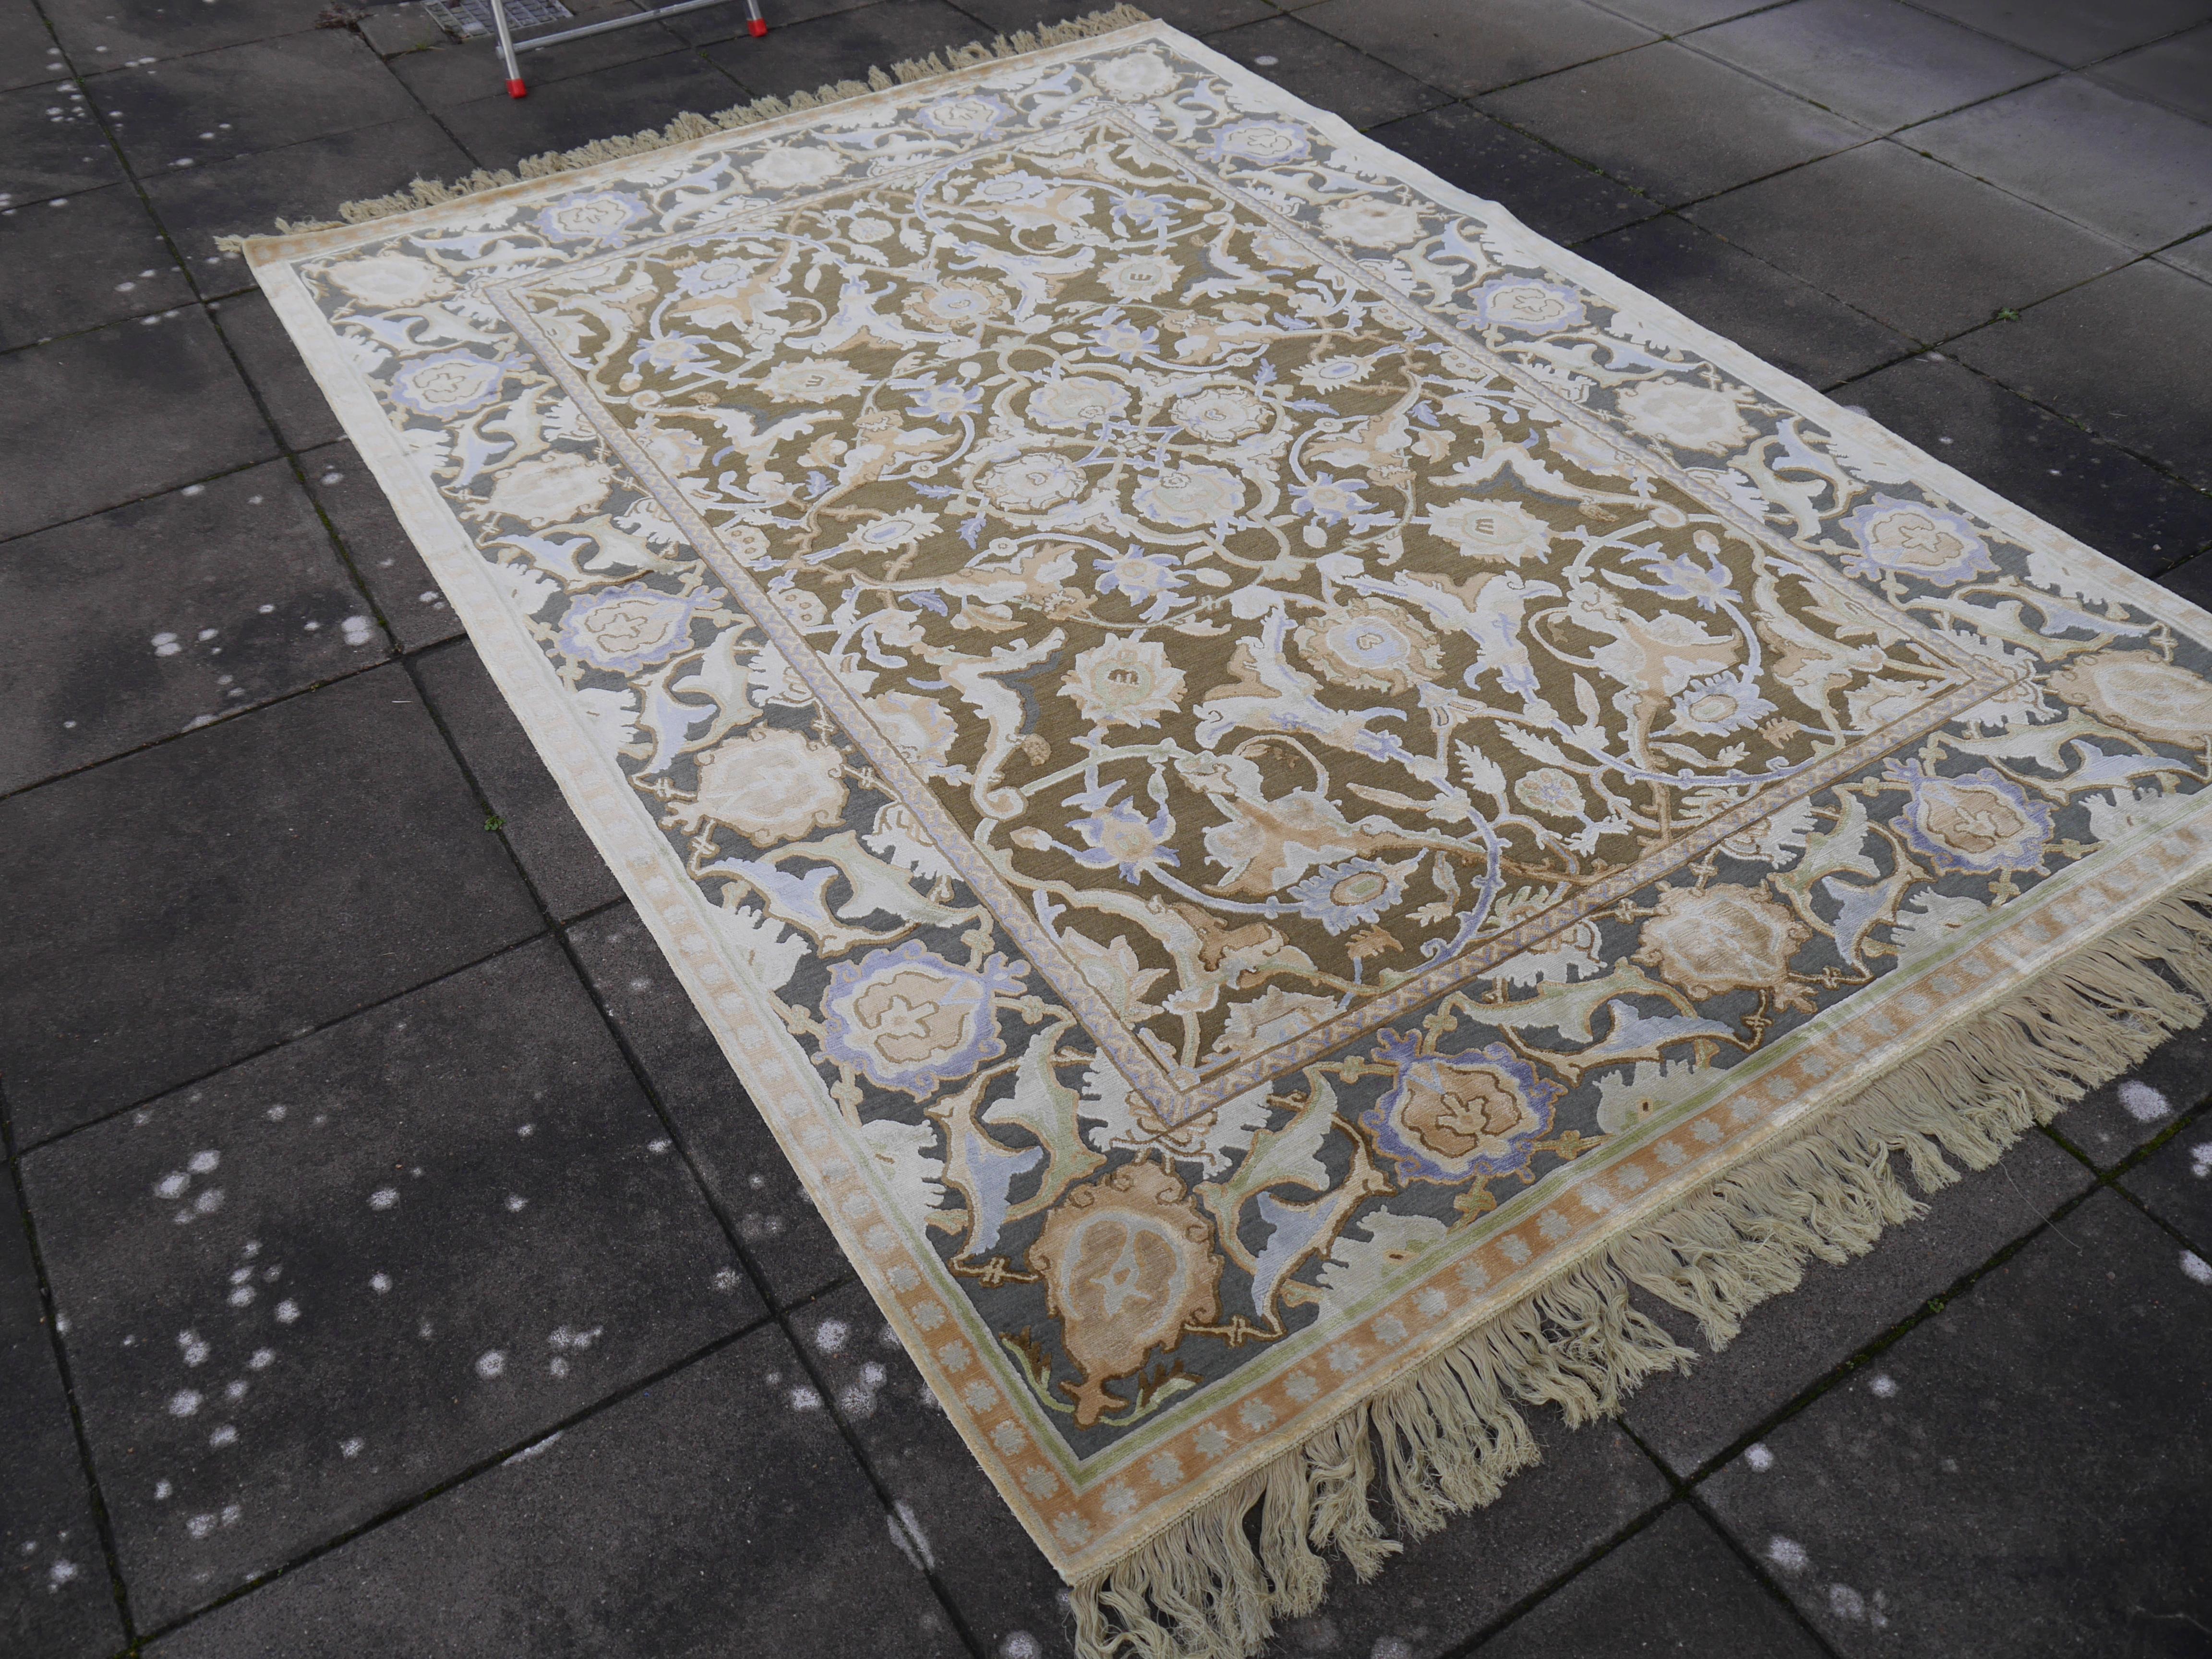 New Polonaise Rug Silk and Wool Antique Isfahan Design Bespoke Sizes 6